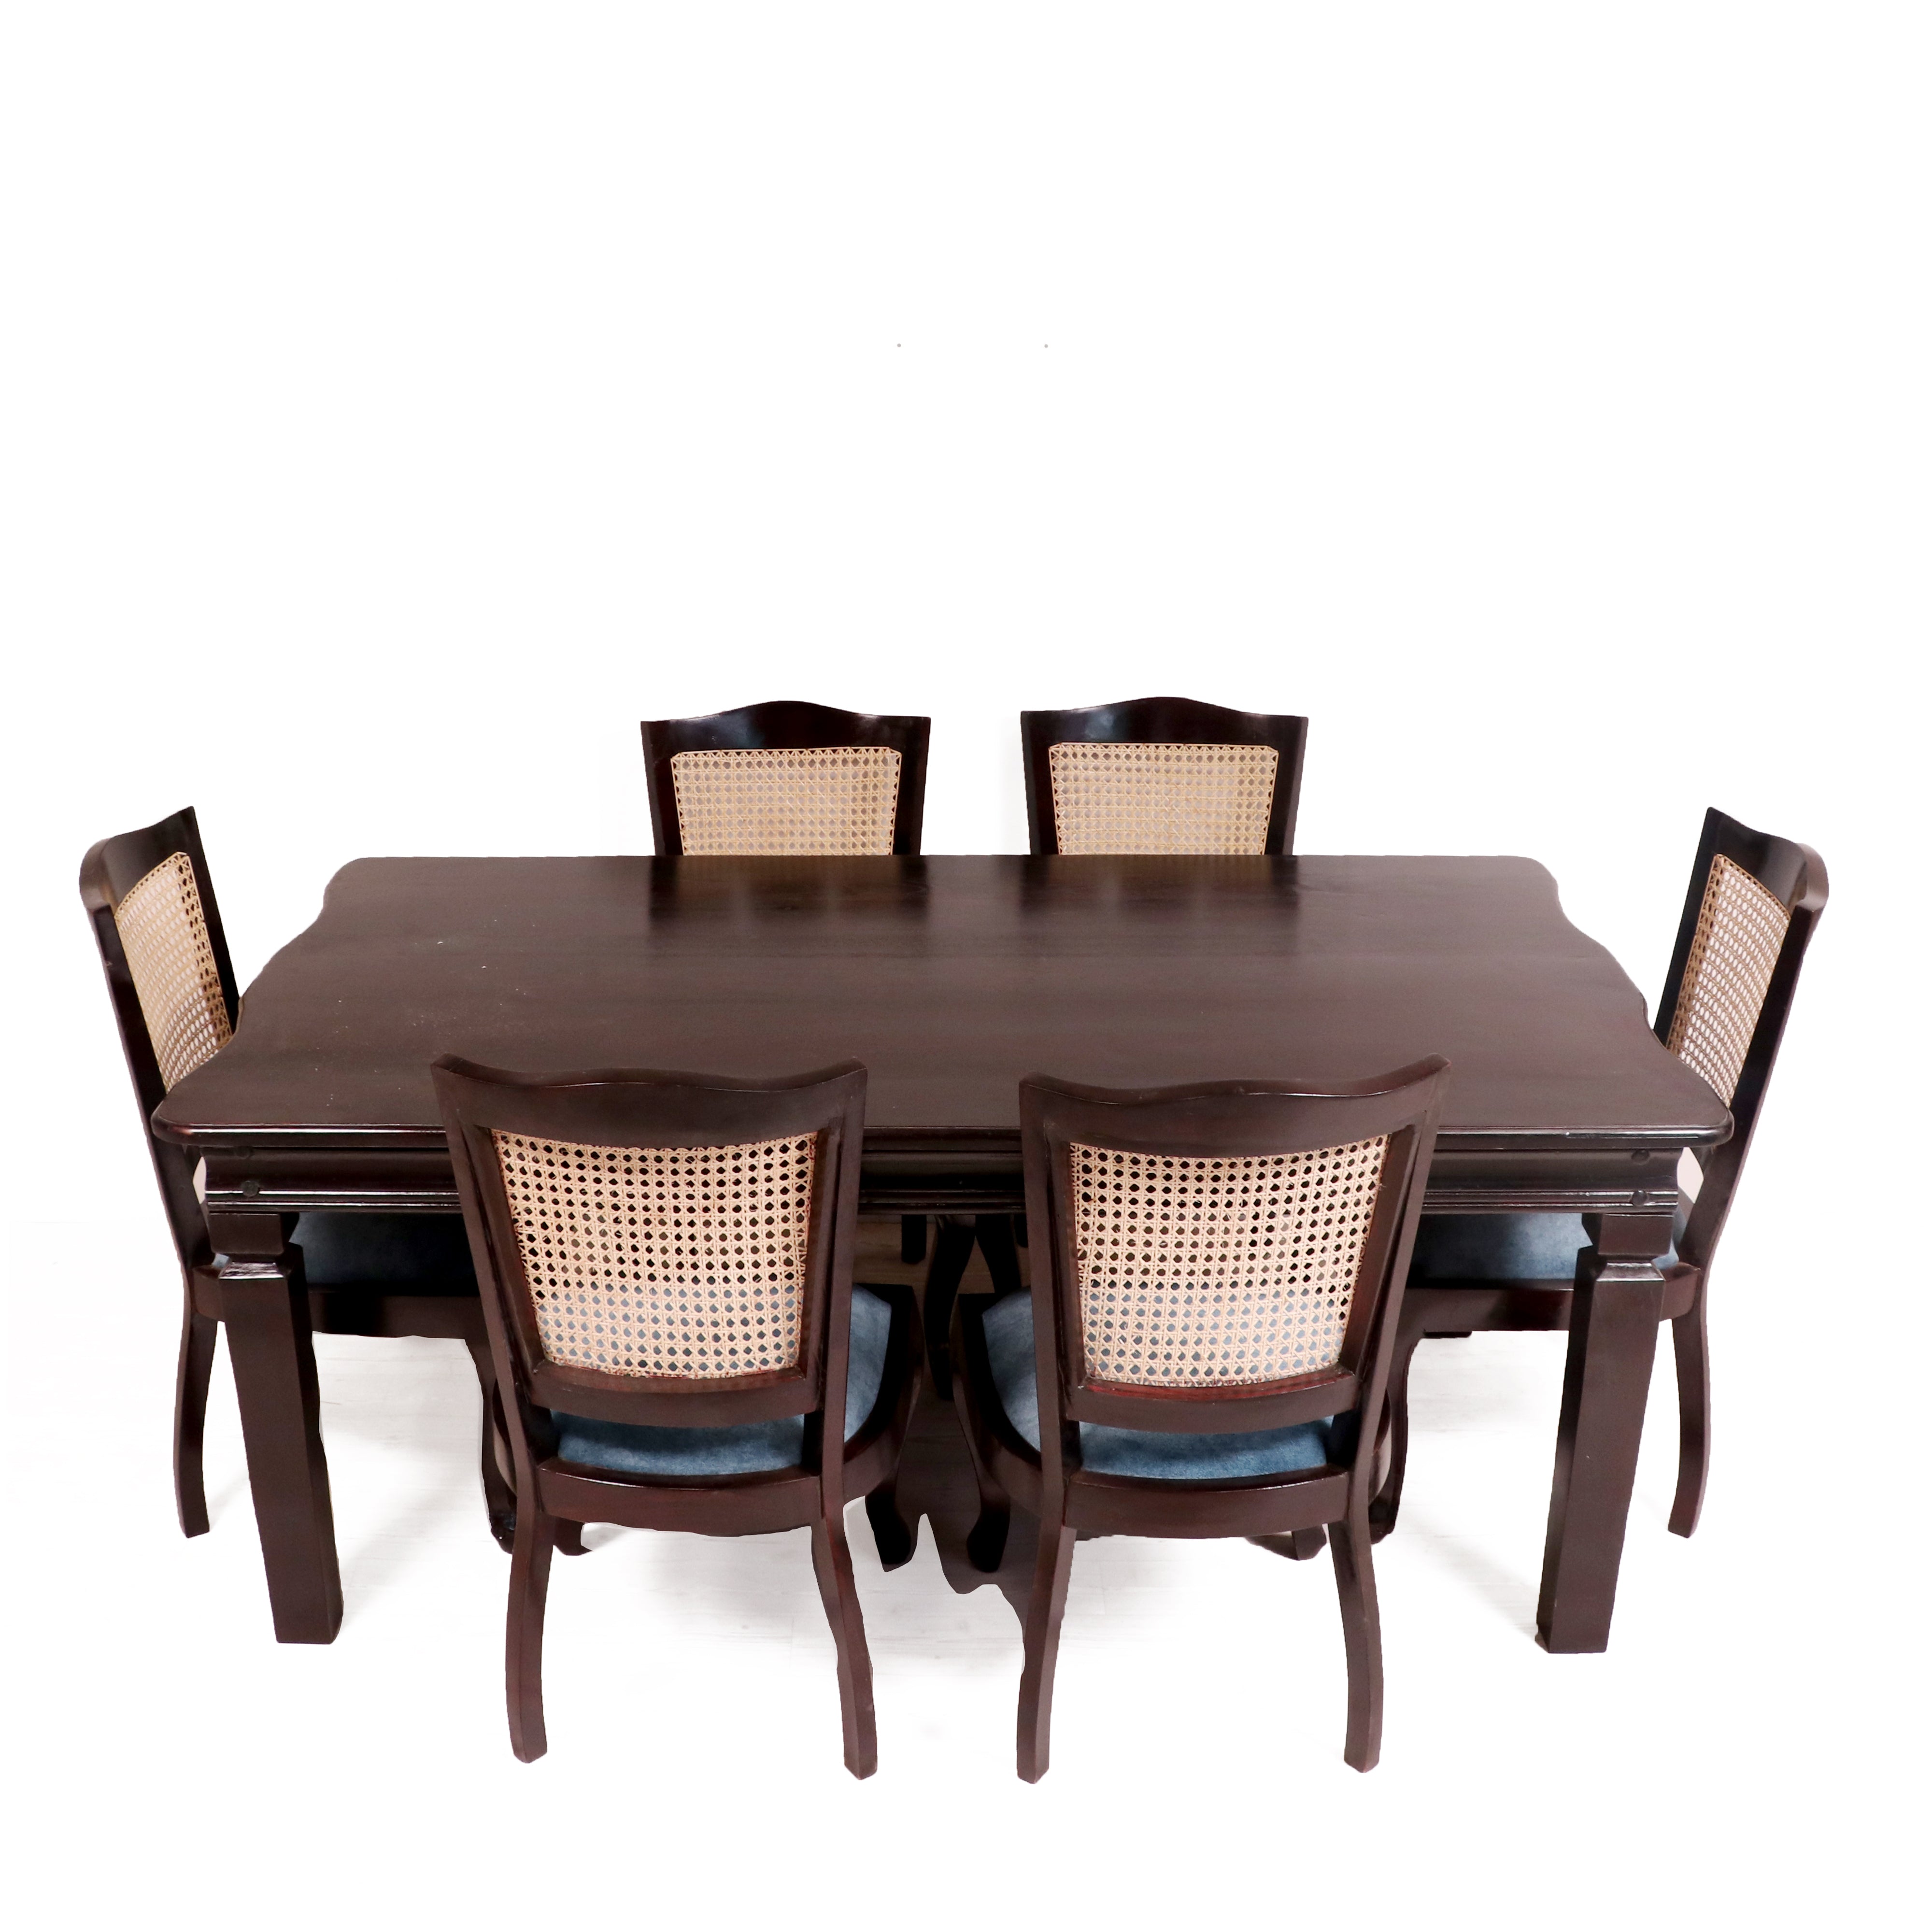 Classic Cane chairs with Modern Dining table 6 Seater Set Dining Set